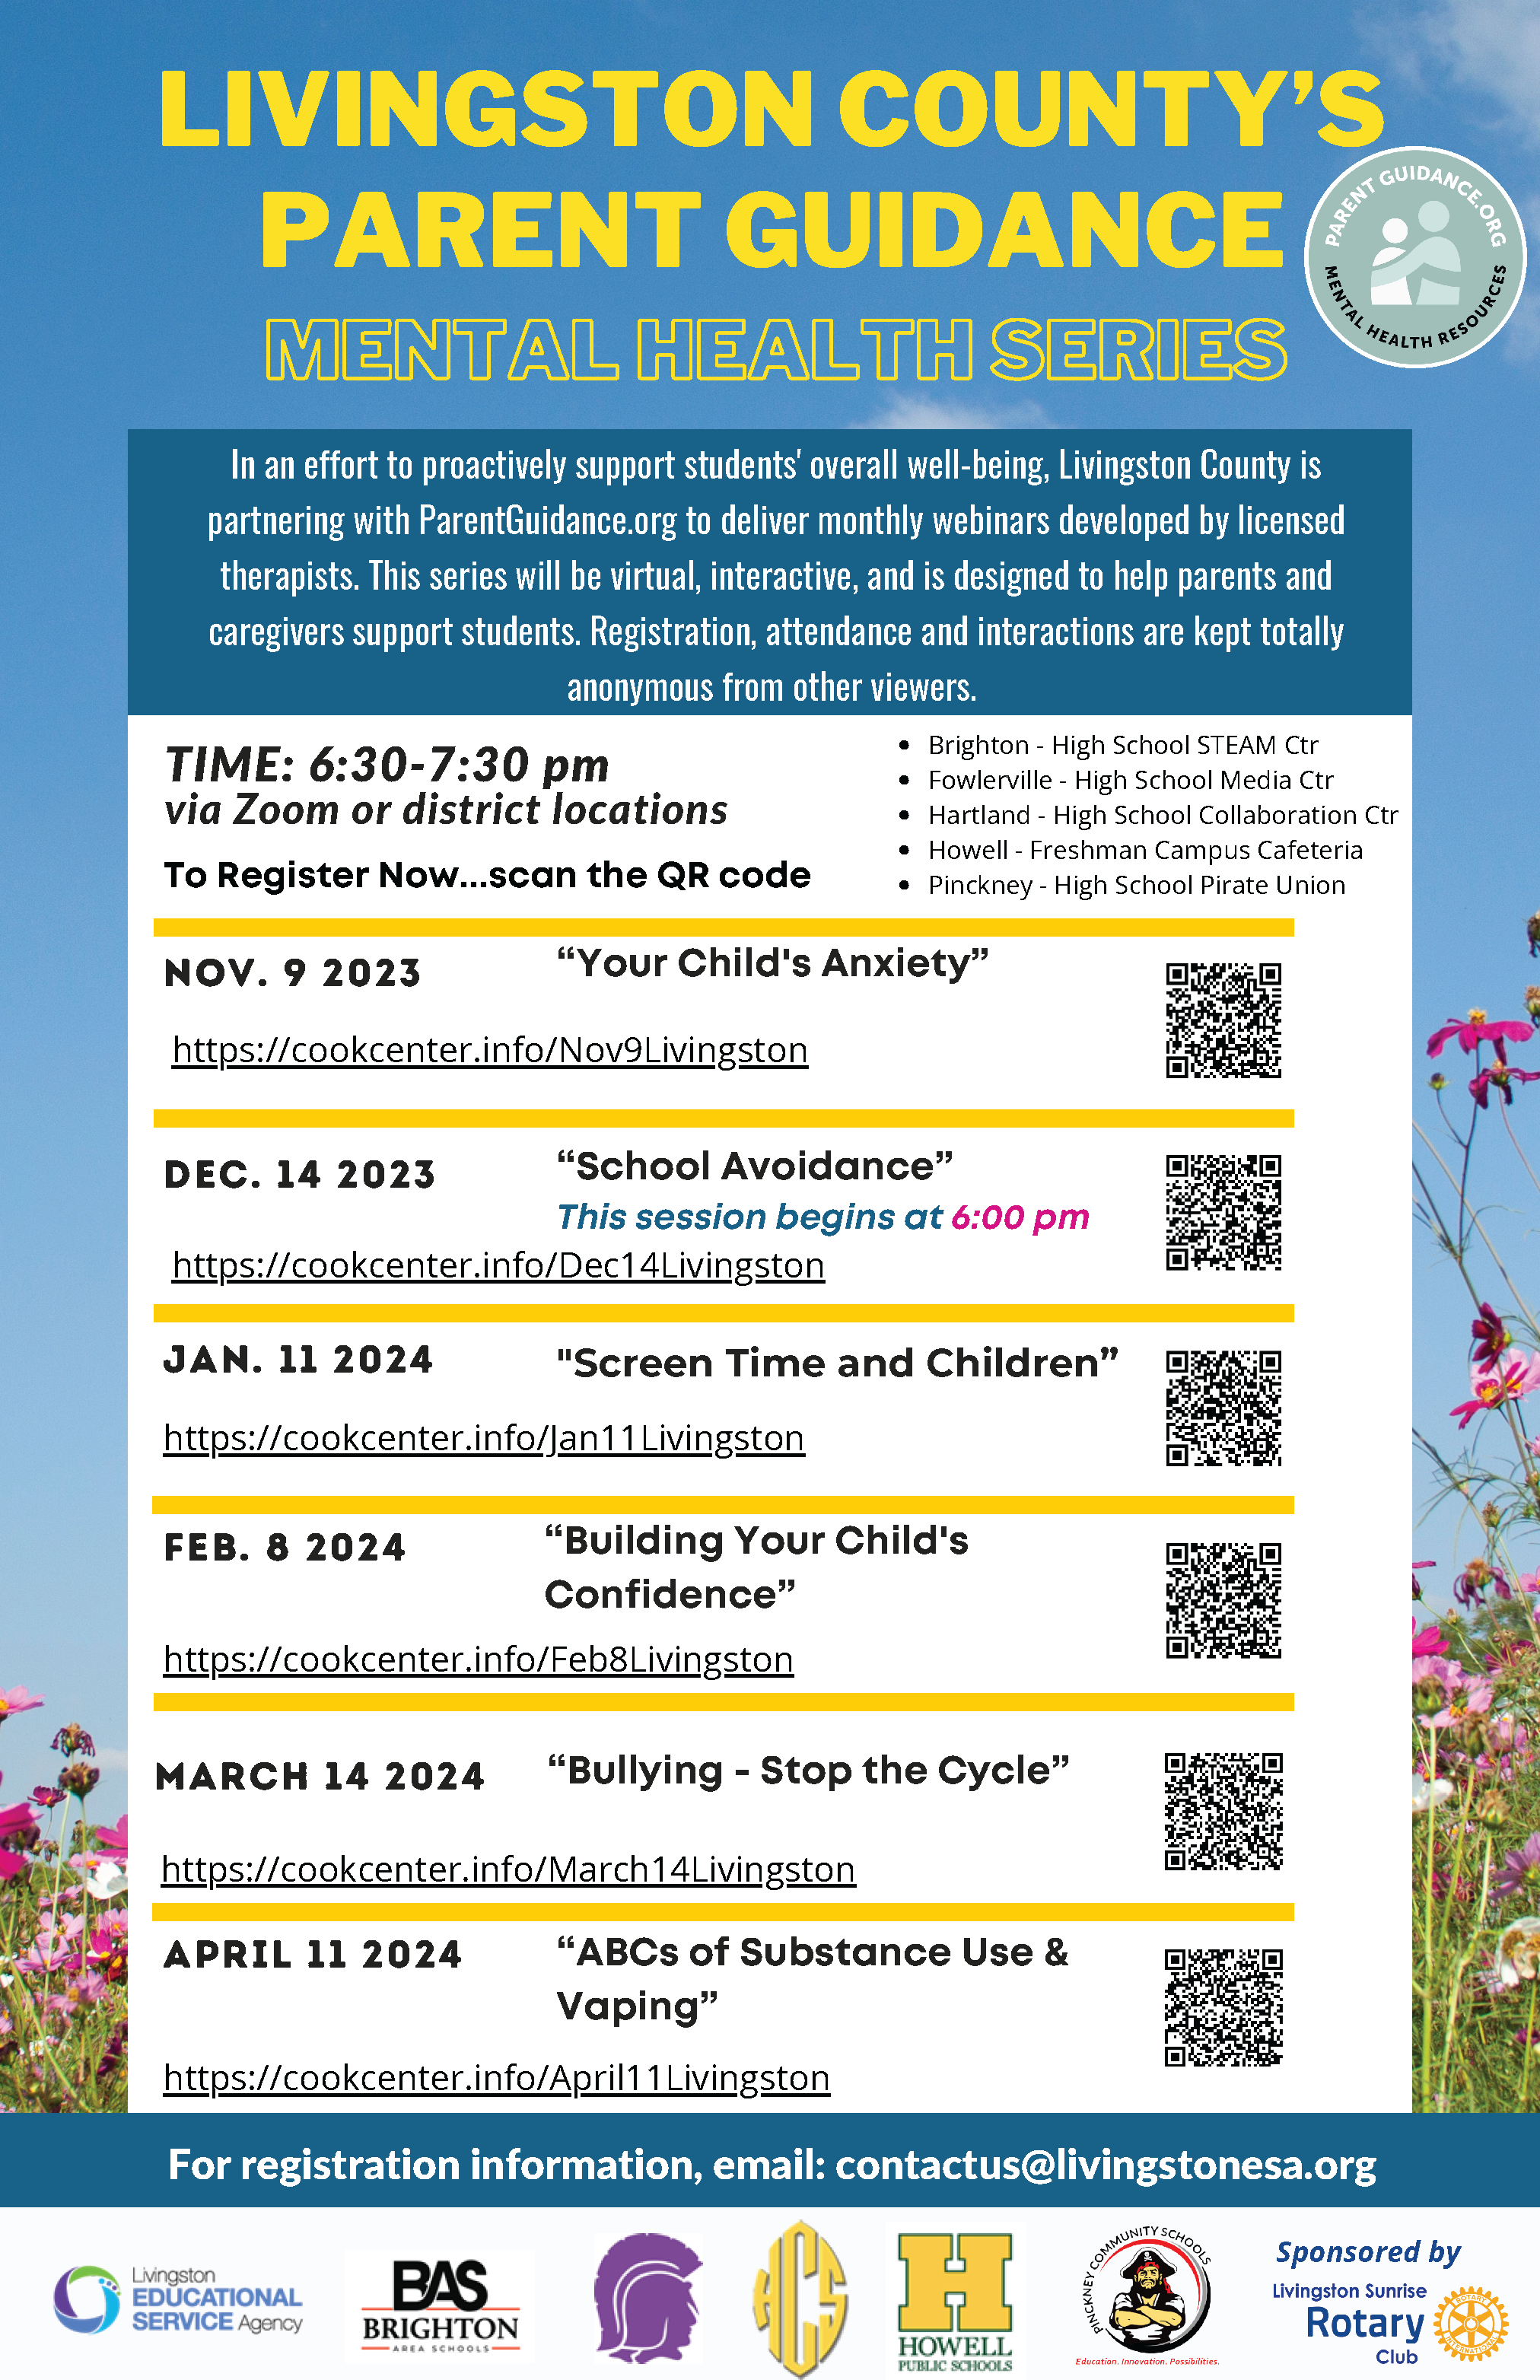 Flyer for the Parent Mental Health Series, also linked in another paragraph